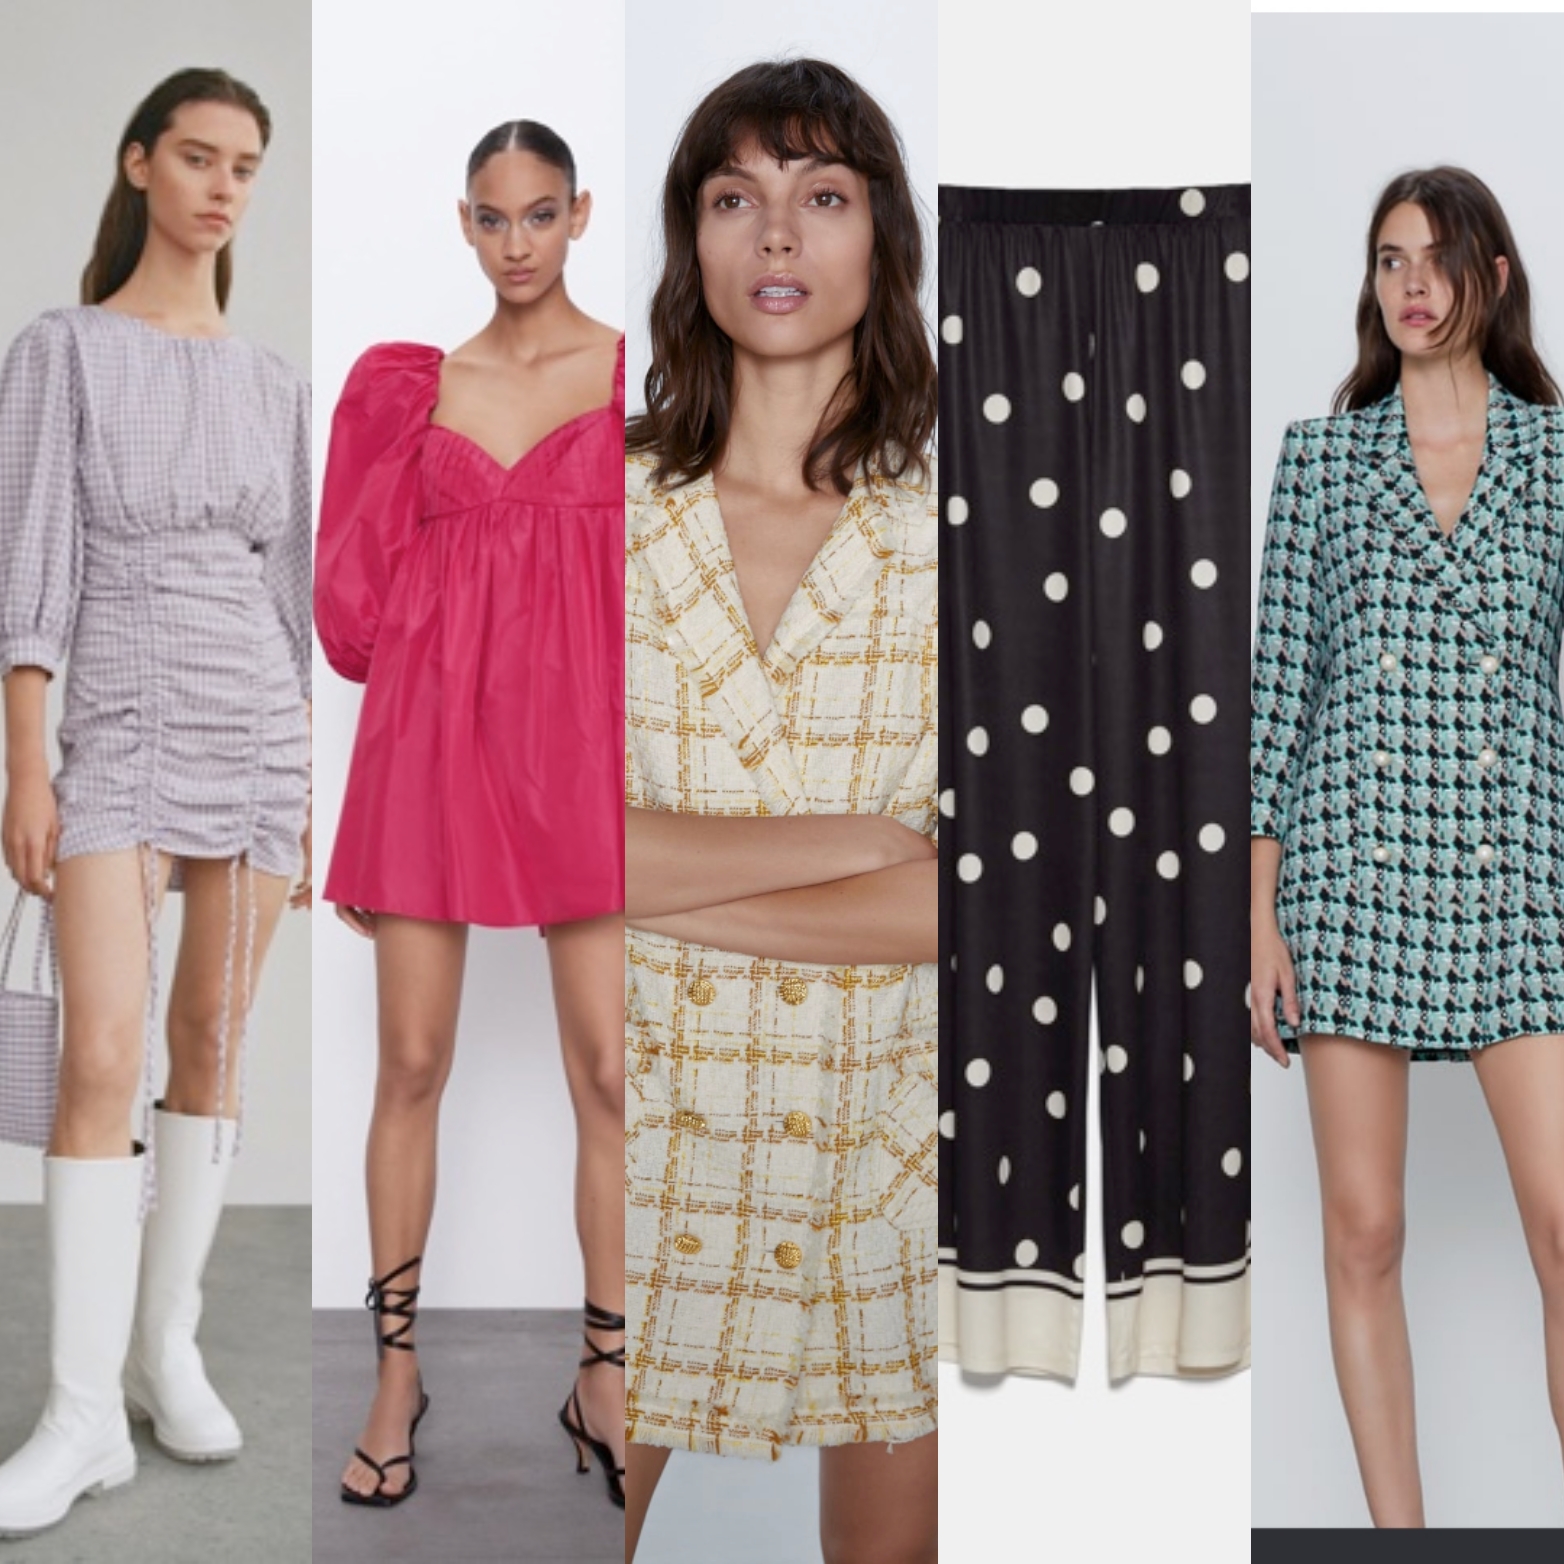 [:it]The most beautiful and original garments of the new zara spring summer collection 2020[:in]THE MOST BEAUTIFUL AND ORIGINAL ITEMS OF THE NEW ZARA SPRING SUMMER 2020 COLLECTION[:]